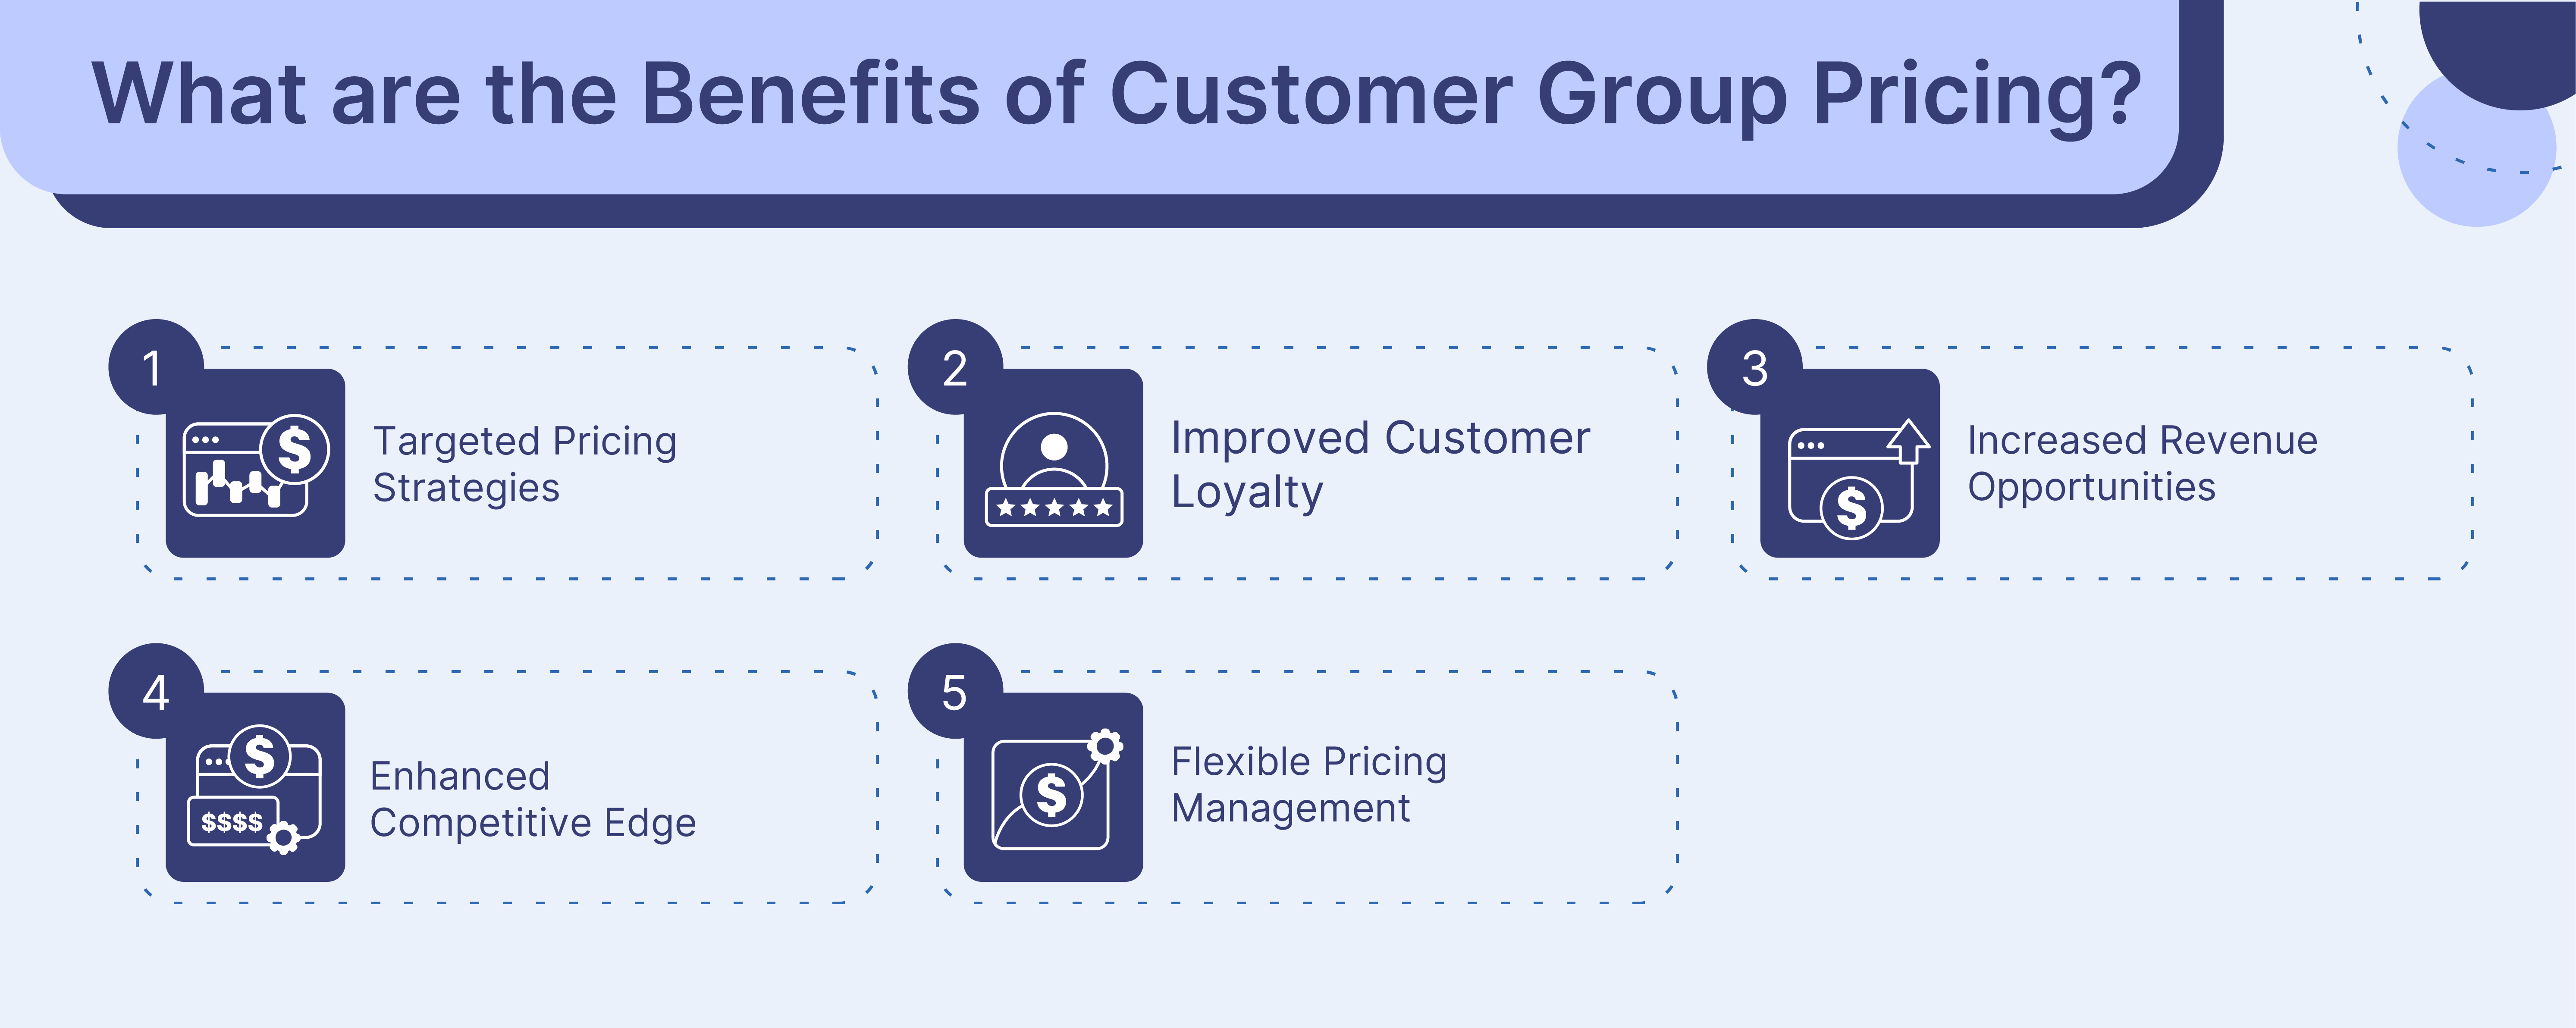 Benefits of Customer Group Pricing